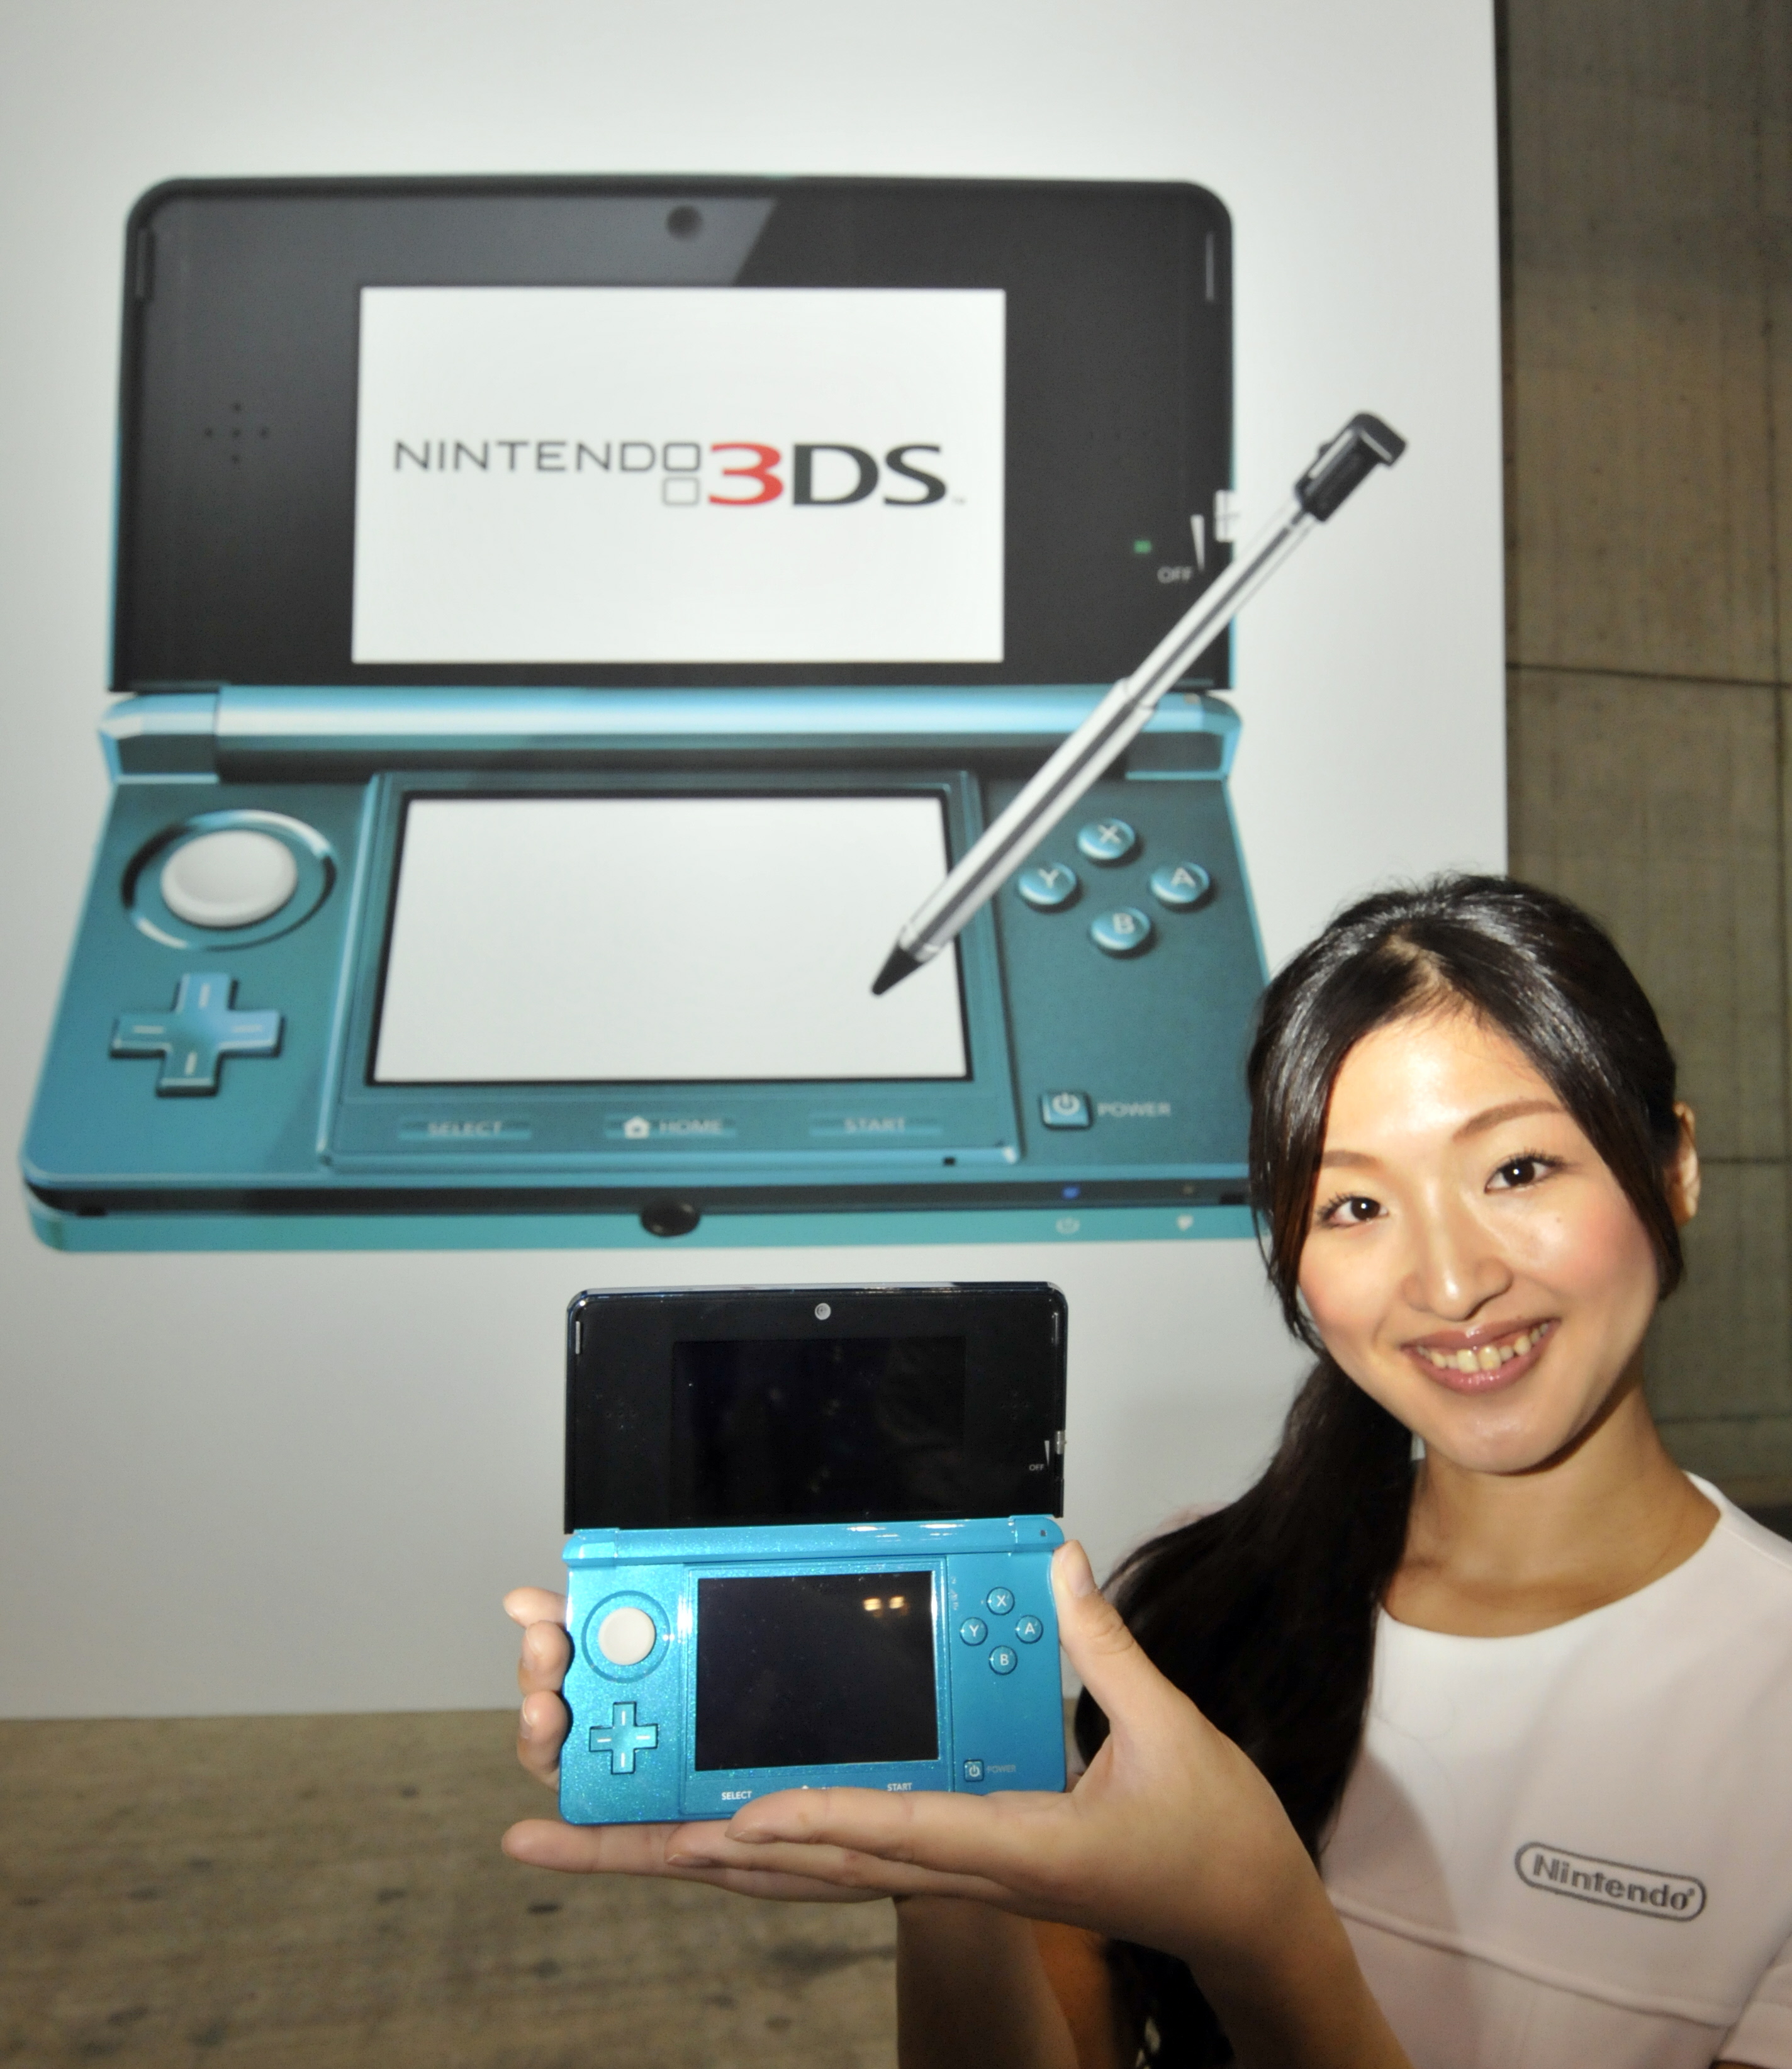 3ds on sale